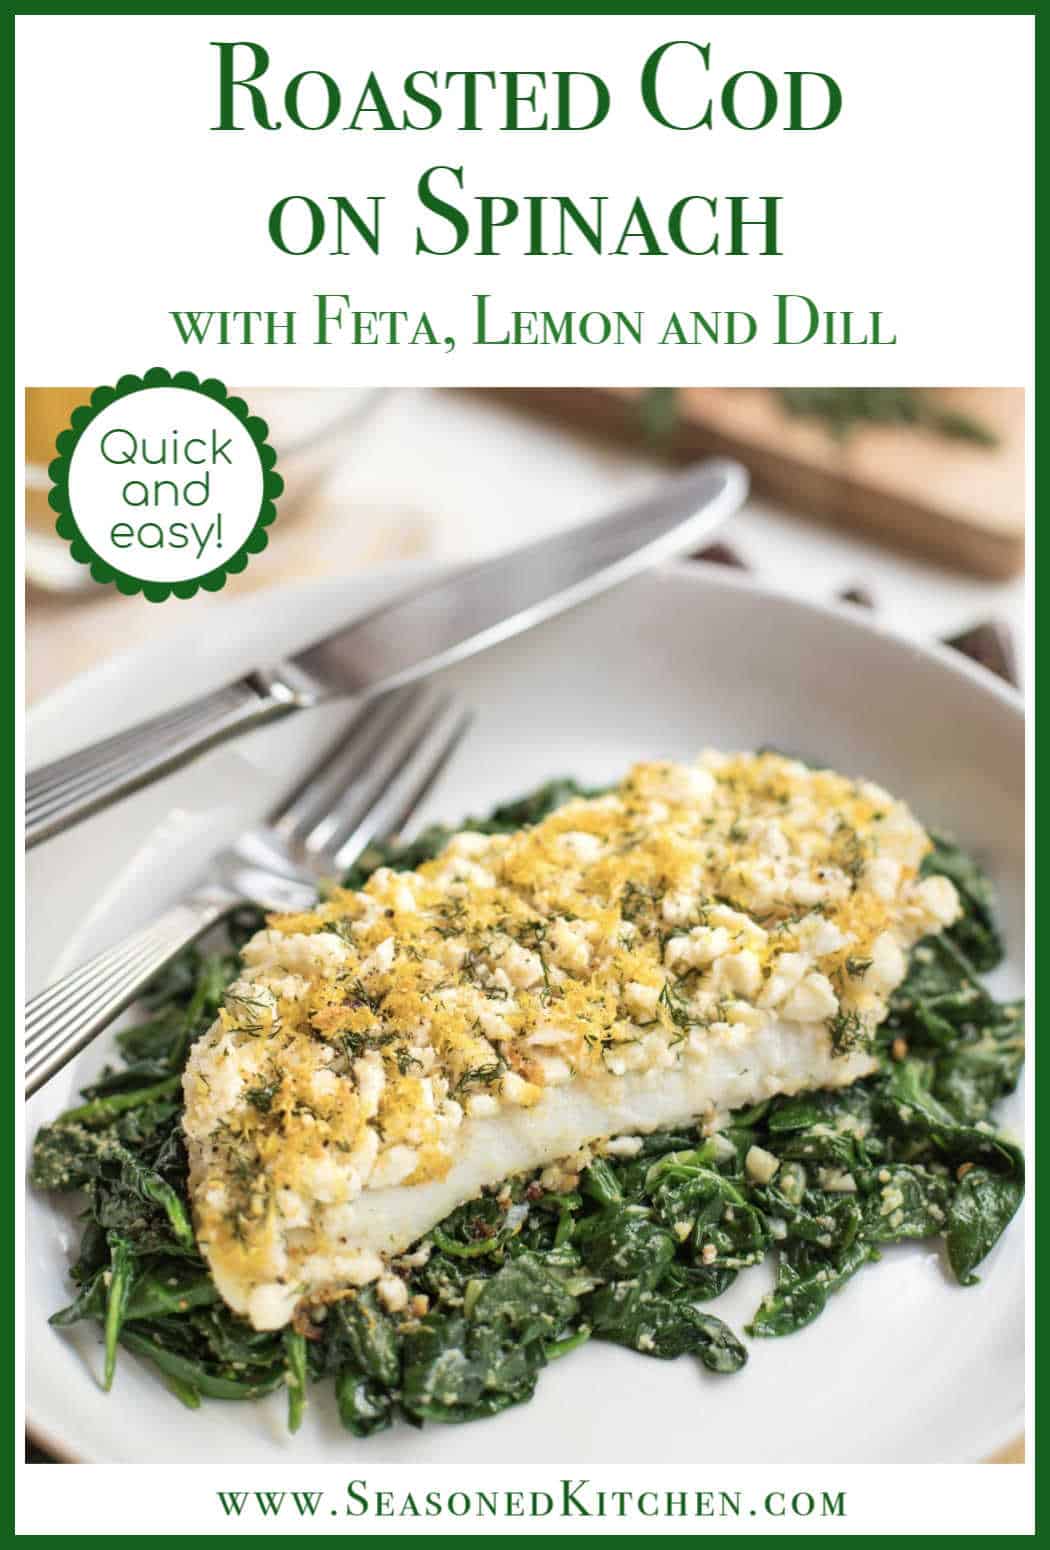 single serving of Baked Cod with Lemon and Dill on Spinach, formatted for sharing on social